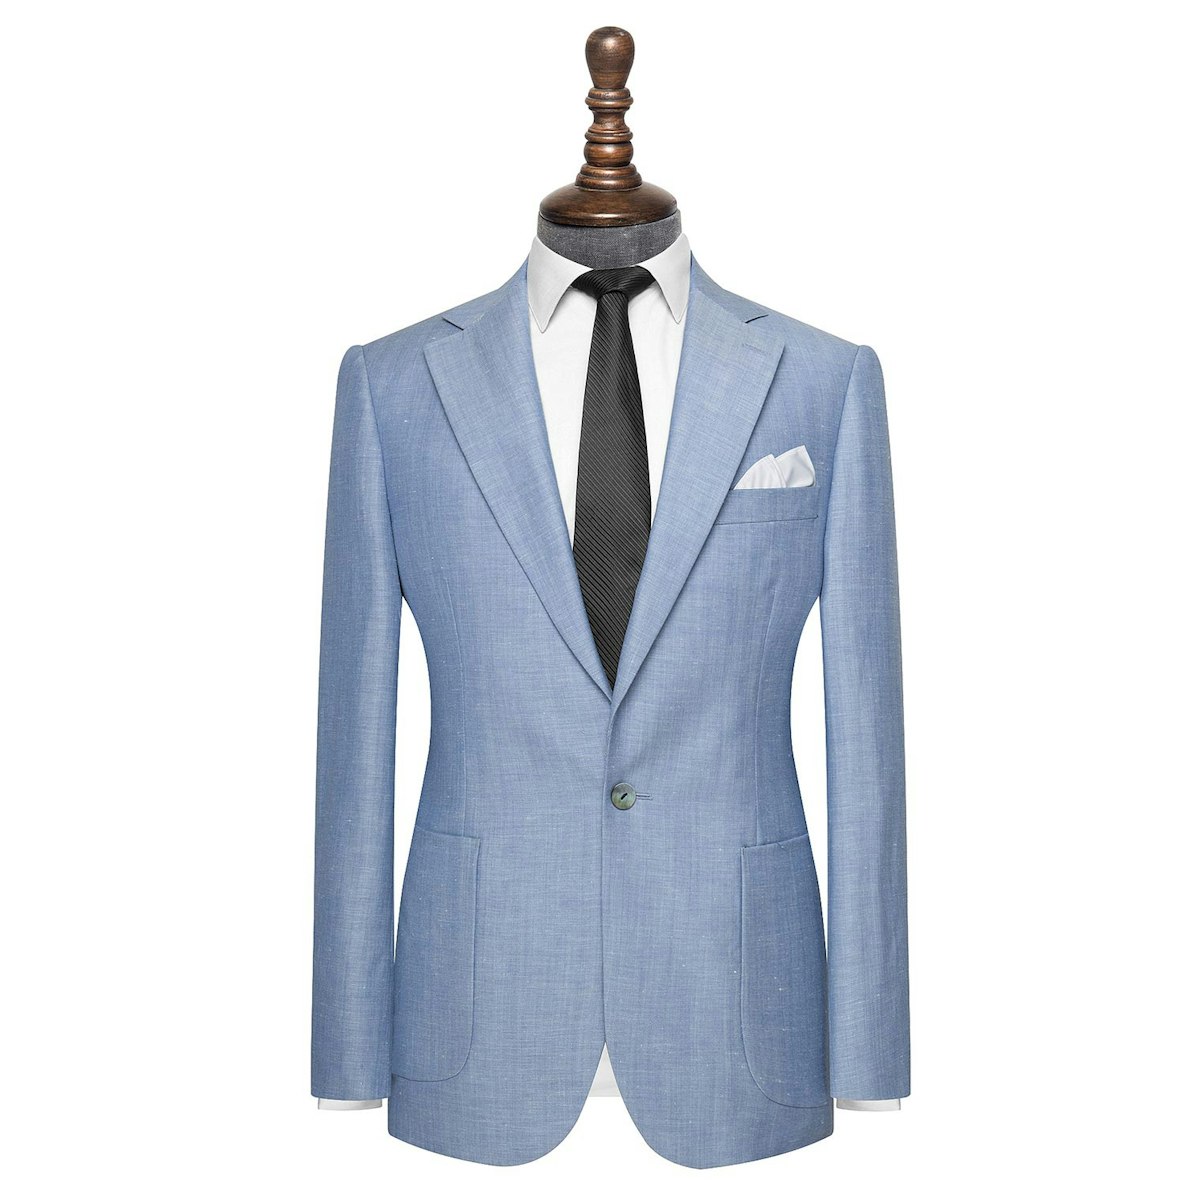 InStitchu Collection The Chesham mens suit